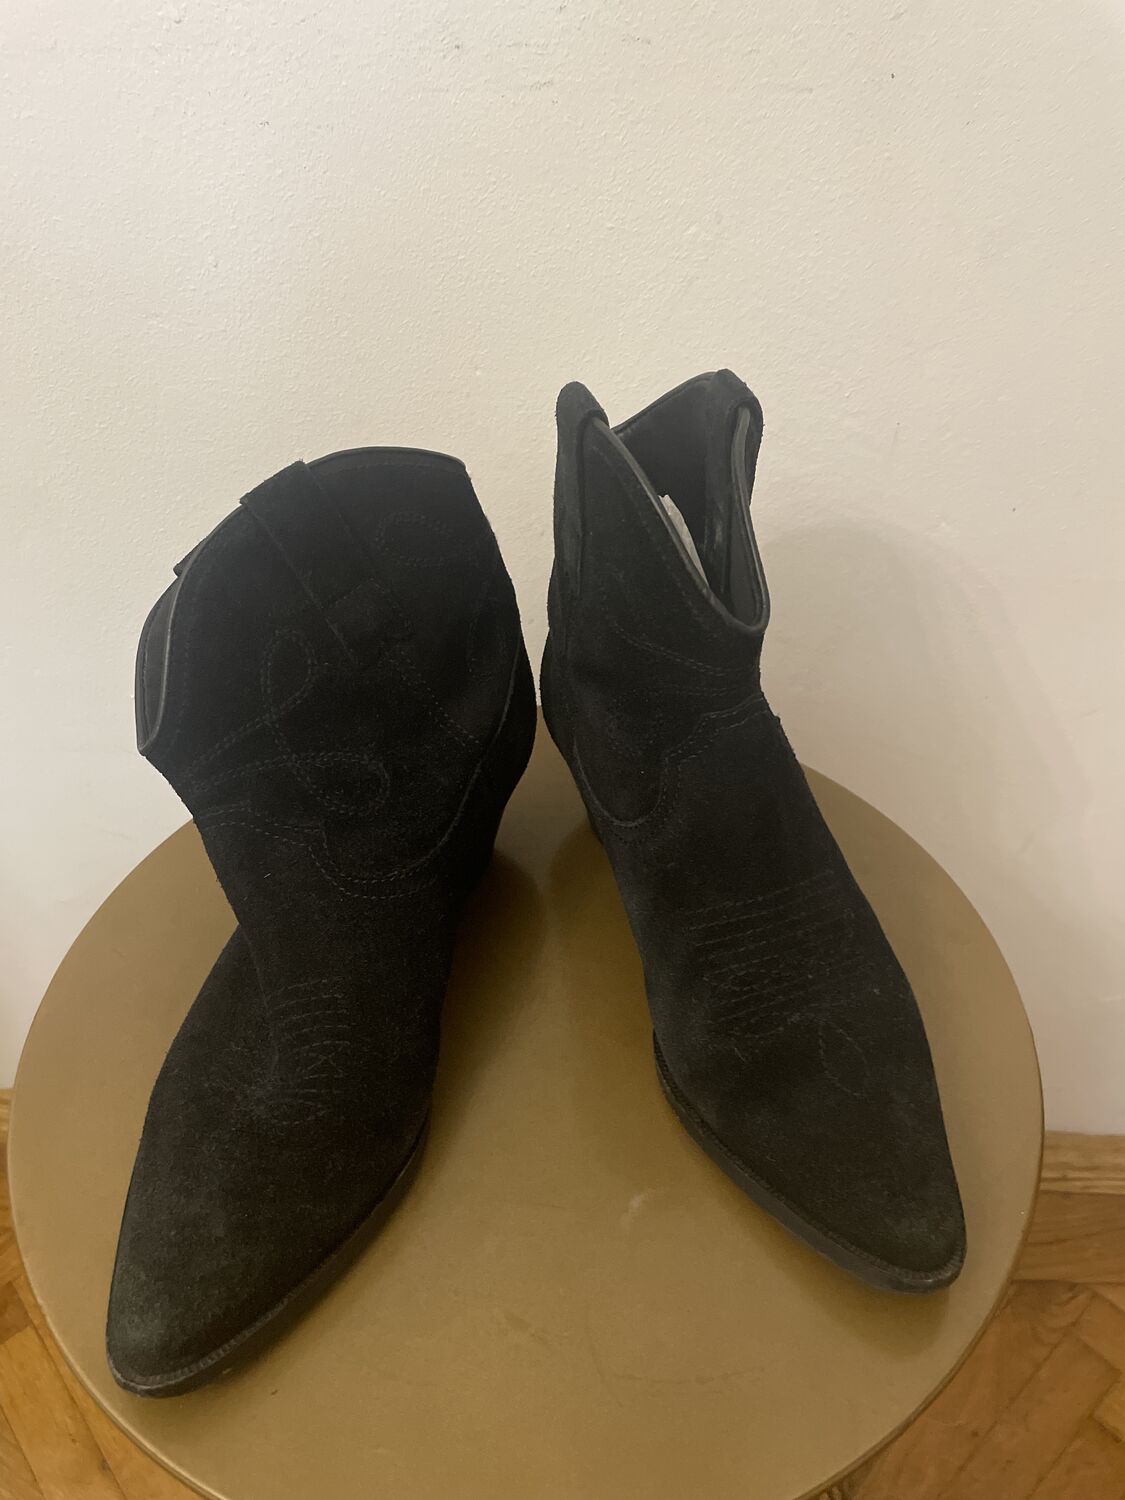 Suede cowboy boots Schutz - 38, buy pre-owned at 75 EUR